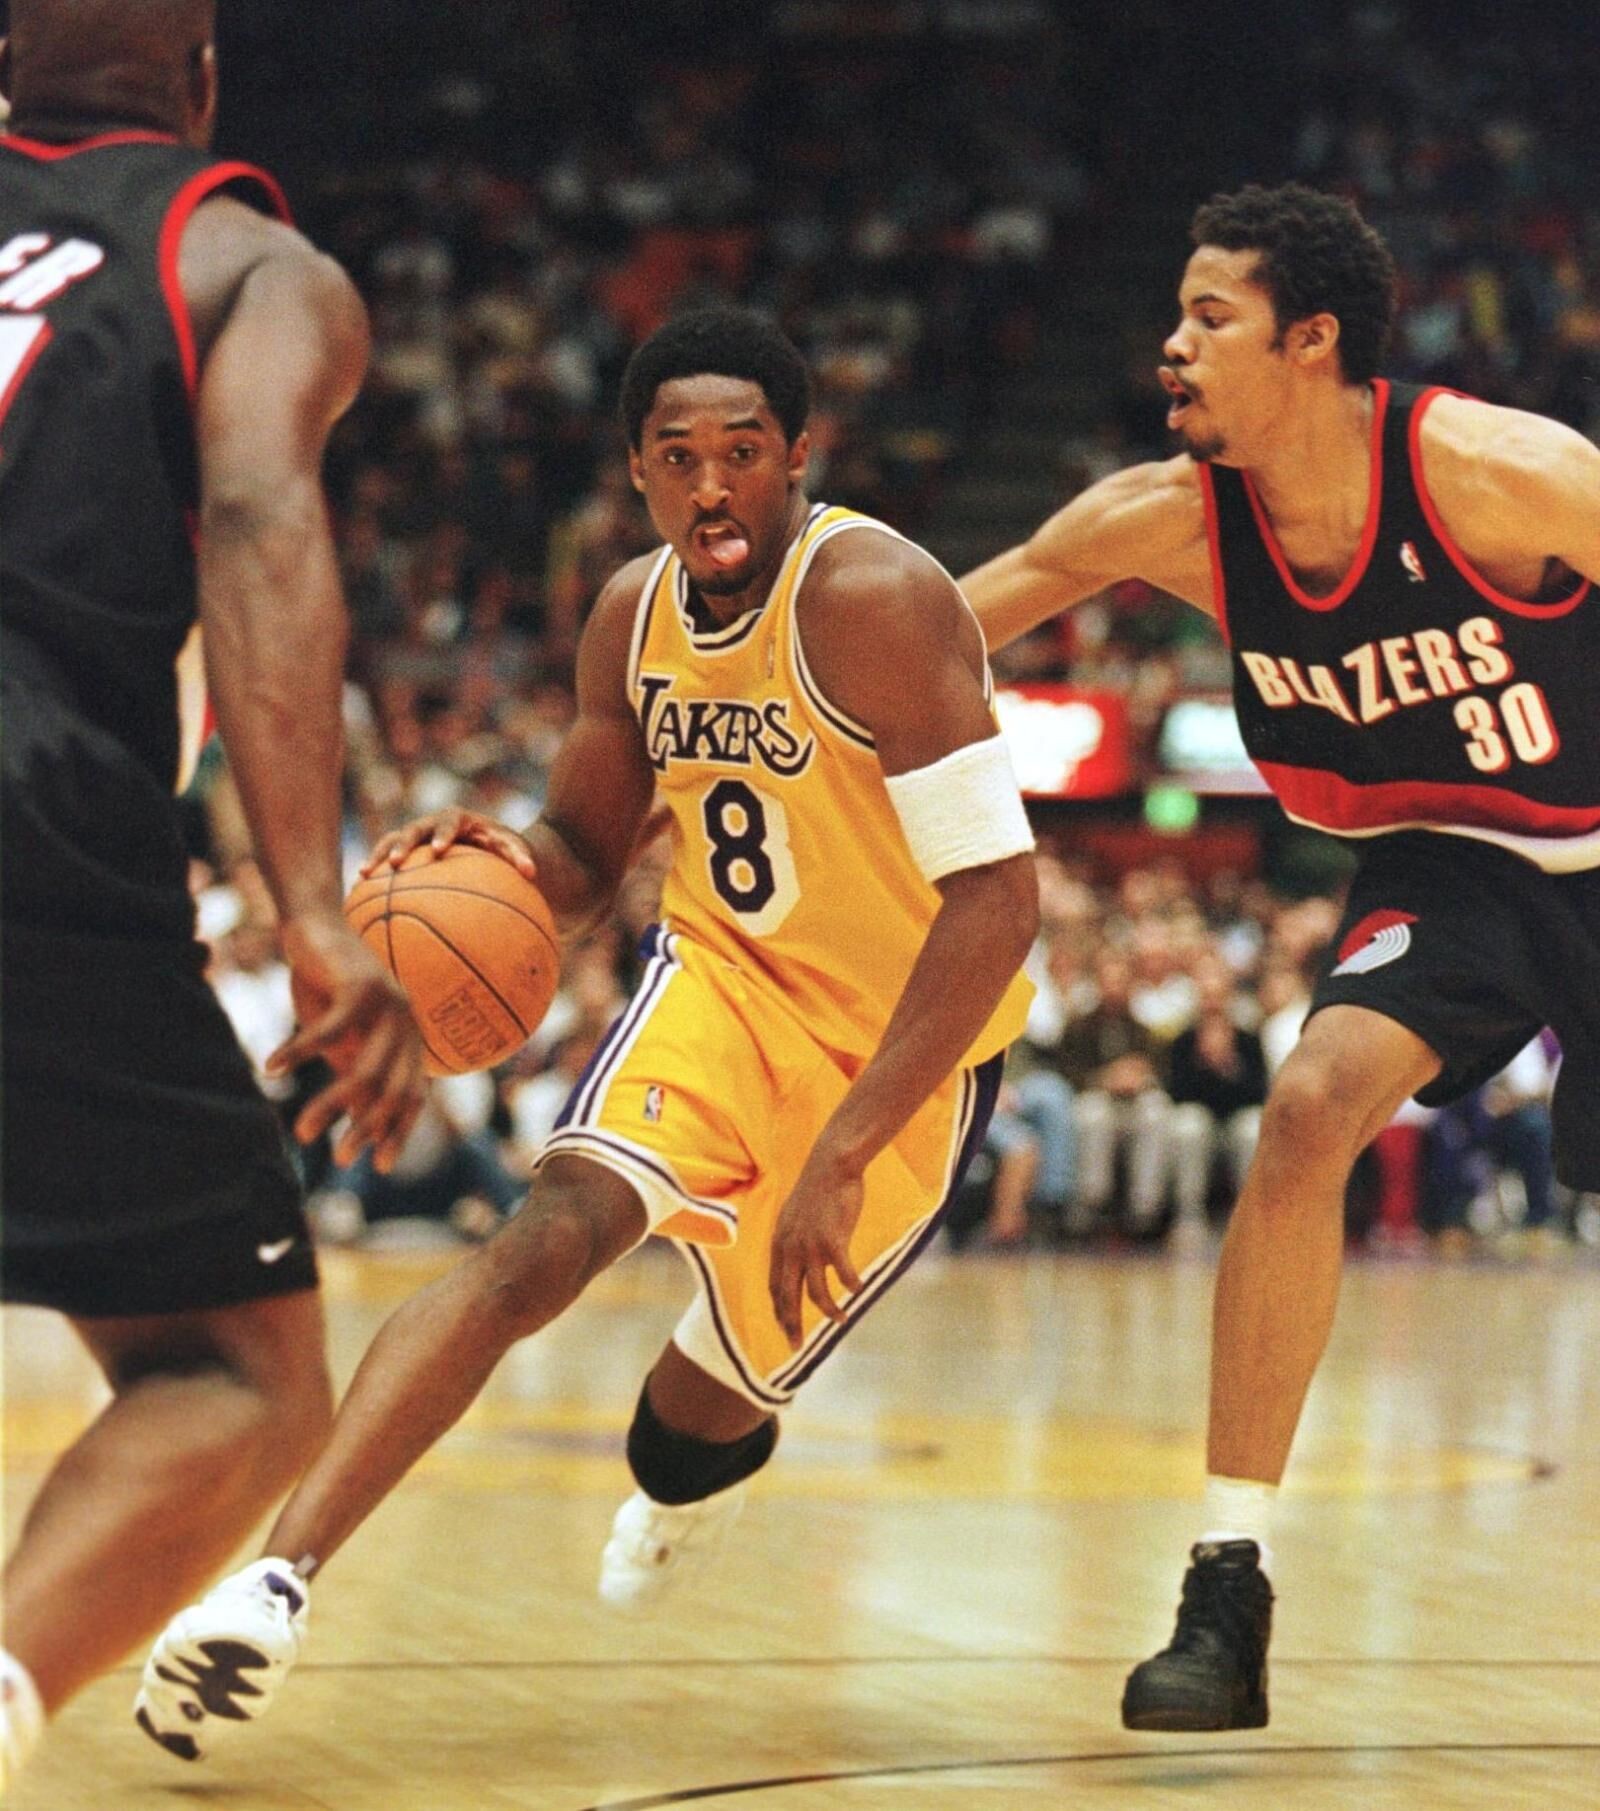 Dear Kobe Bryant: A Letter From A ’90s Kid